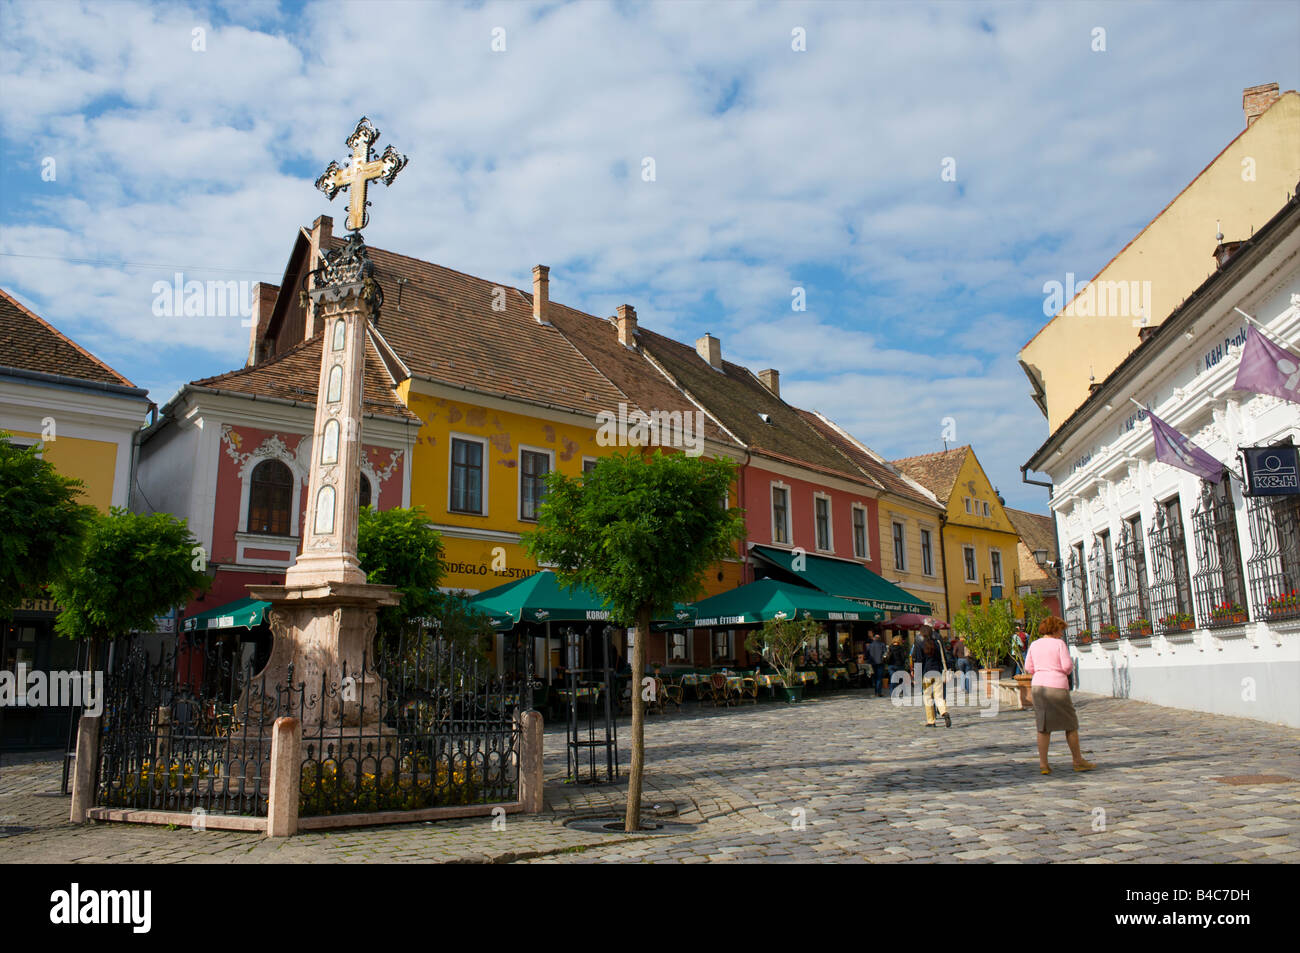 Market Cross and Surrounding Buildings, Szentendre, Hungary, a small village twenty kilometers up the Danube river from Budapest Stock Photo